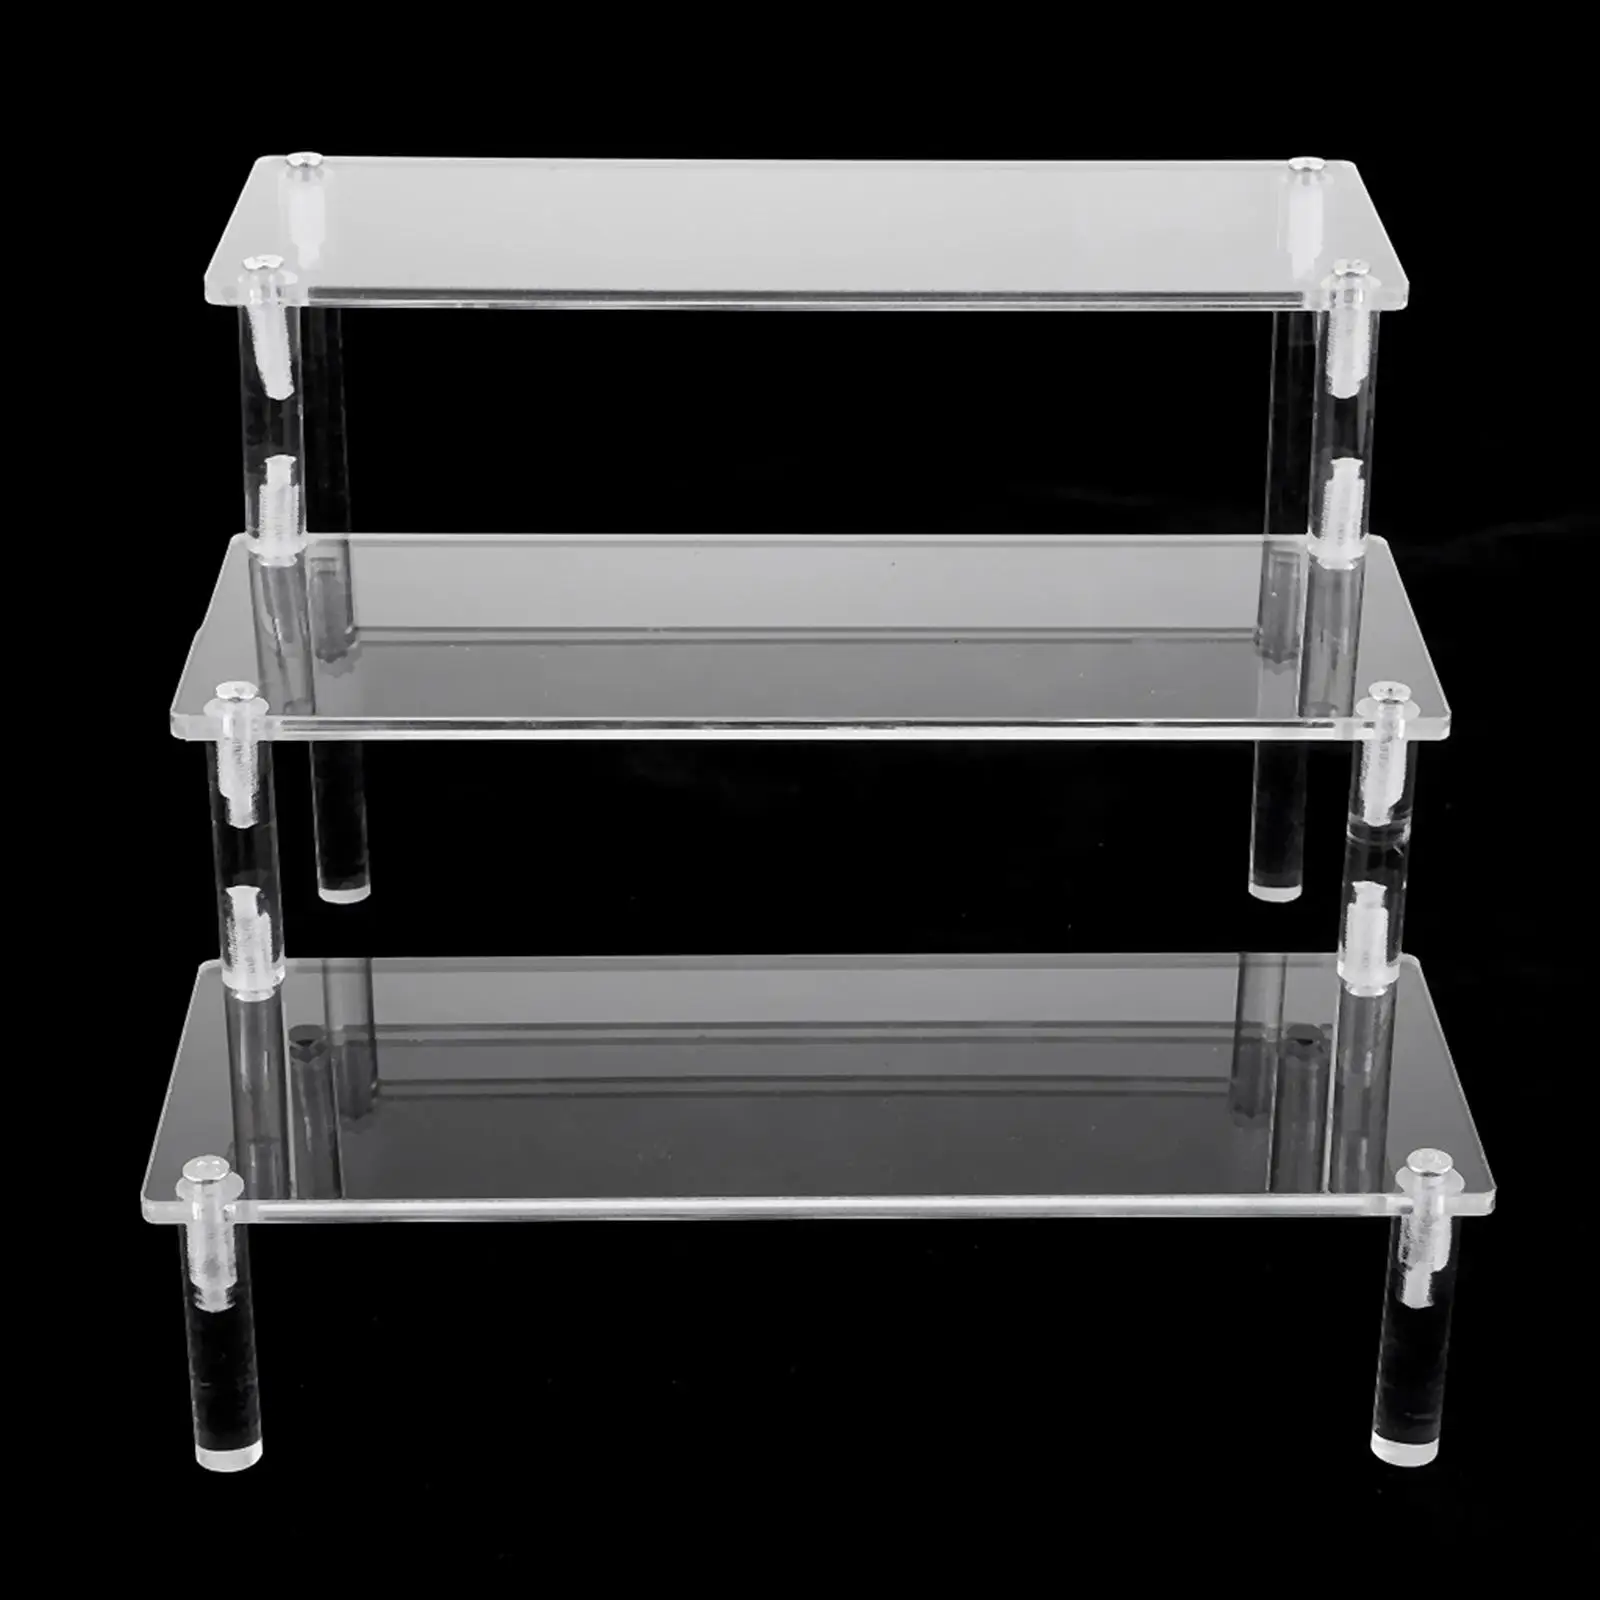 Transparent Ladder Tier Acrylic Rack Cupcakes Cosmetics Ladder Holder Figure Doll Toys Display Stand Collectibles Riser Shelf